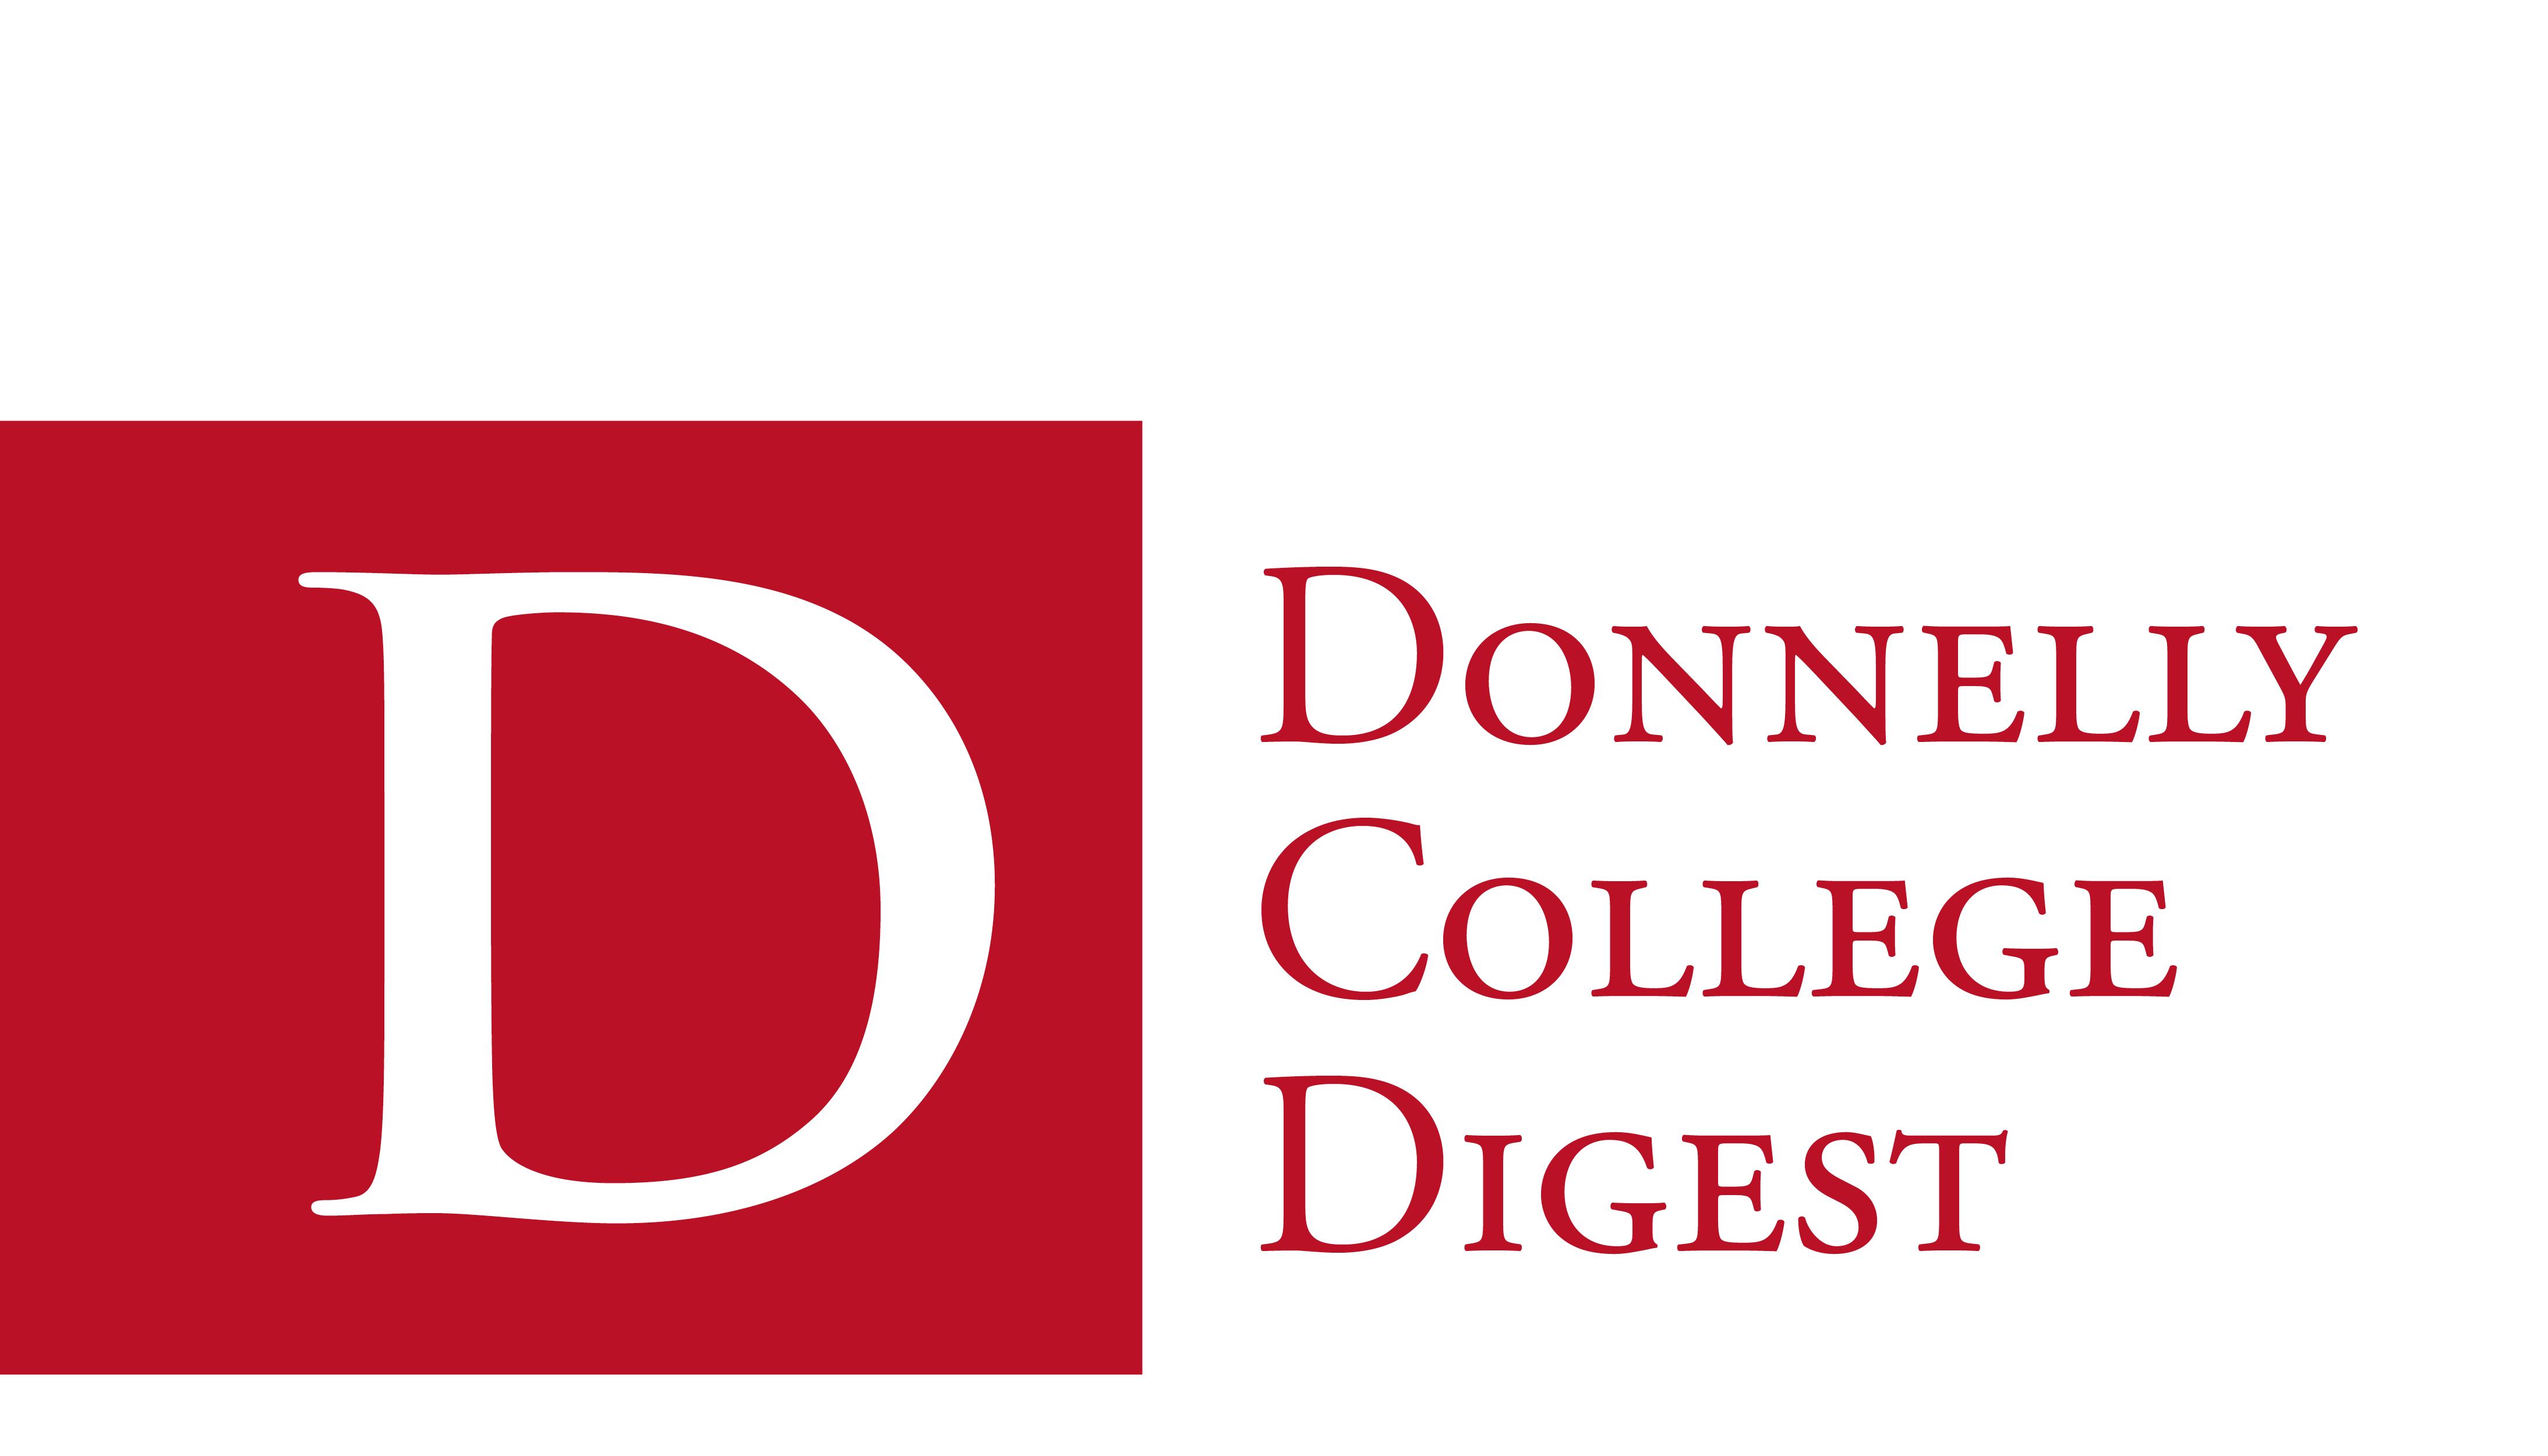 Donnelly College Digest